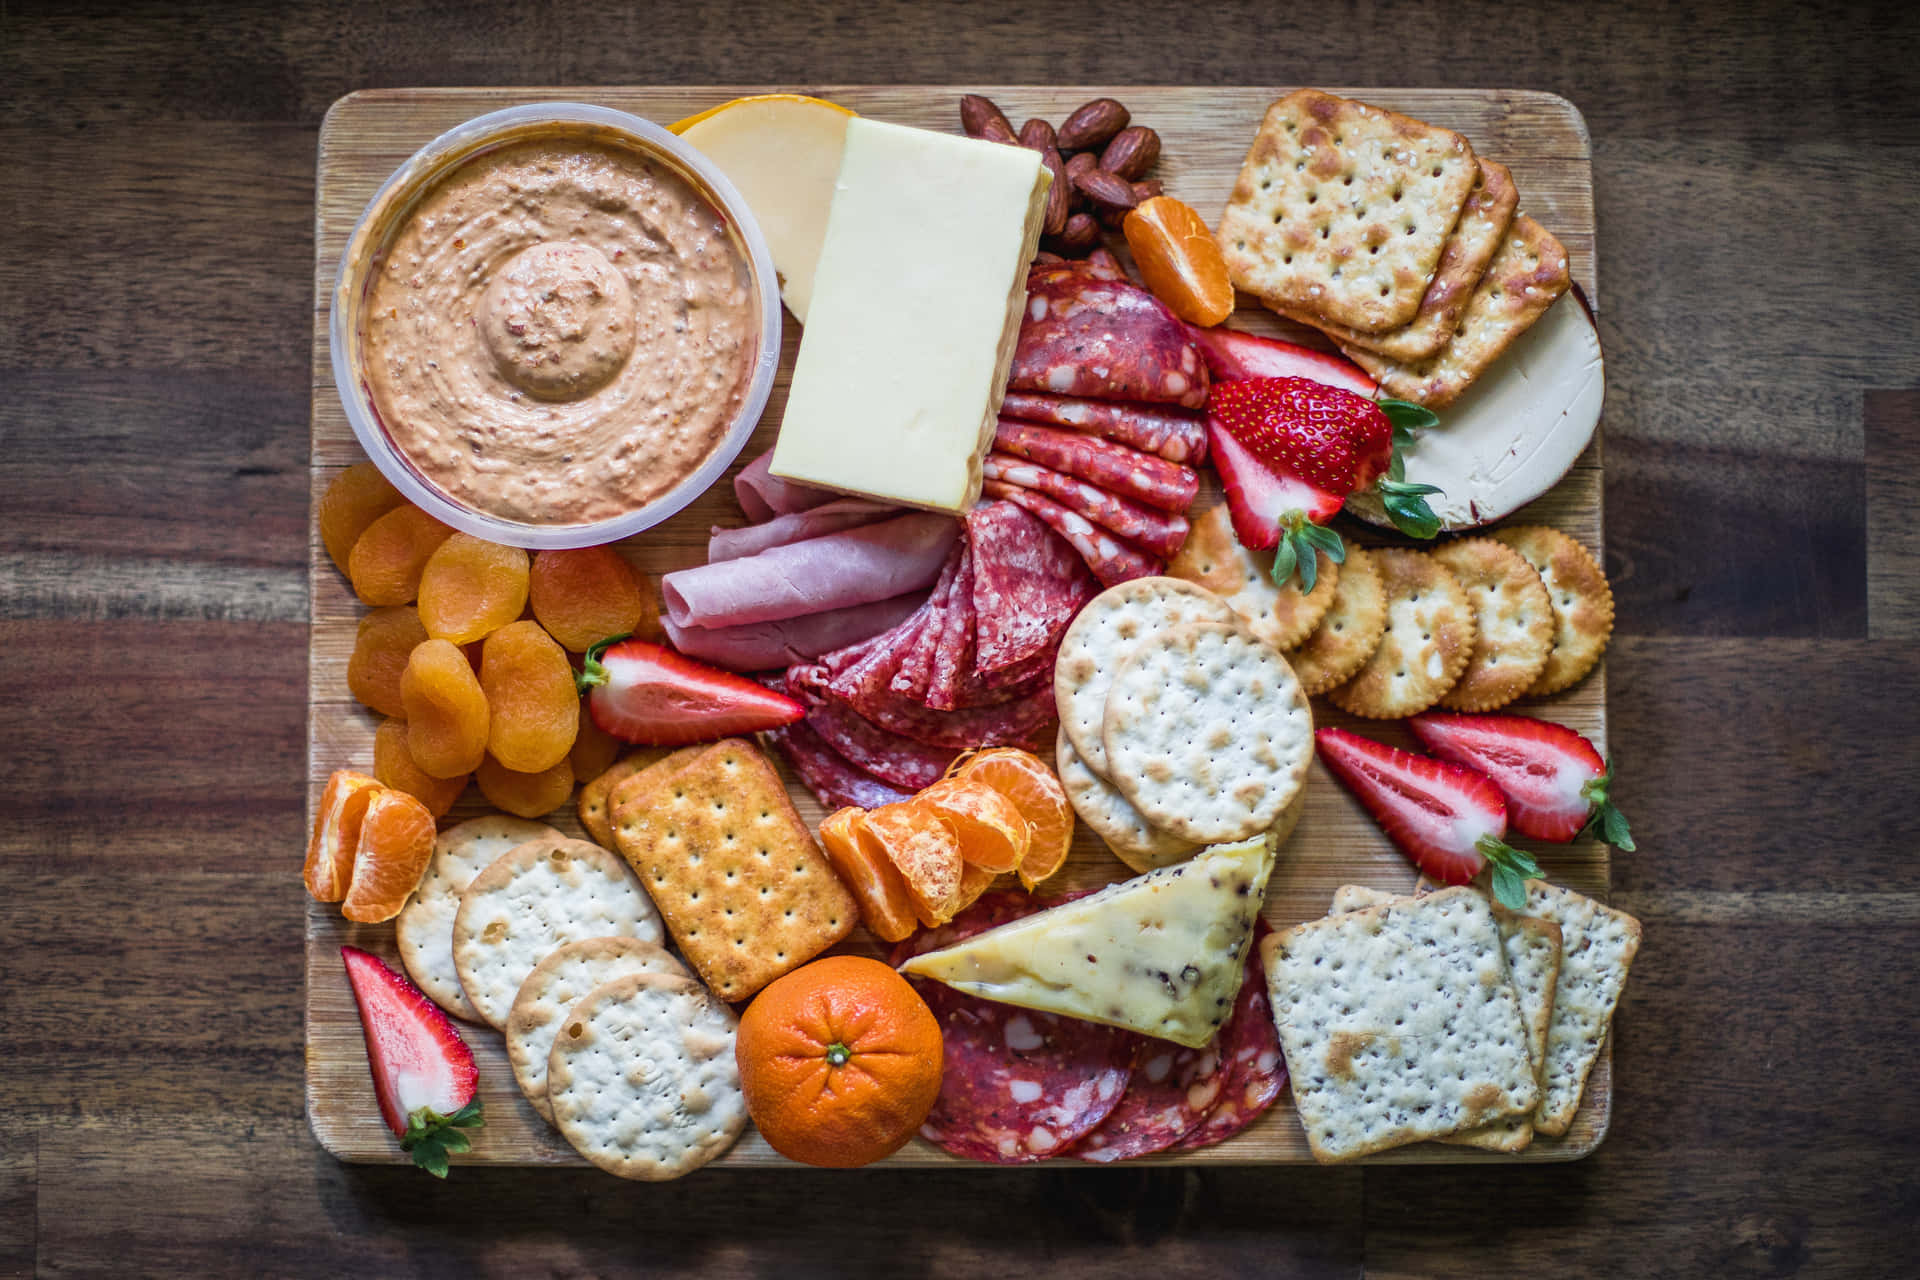 A vibrant assortment of delicious cheeses on a rustic wooden table.